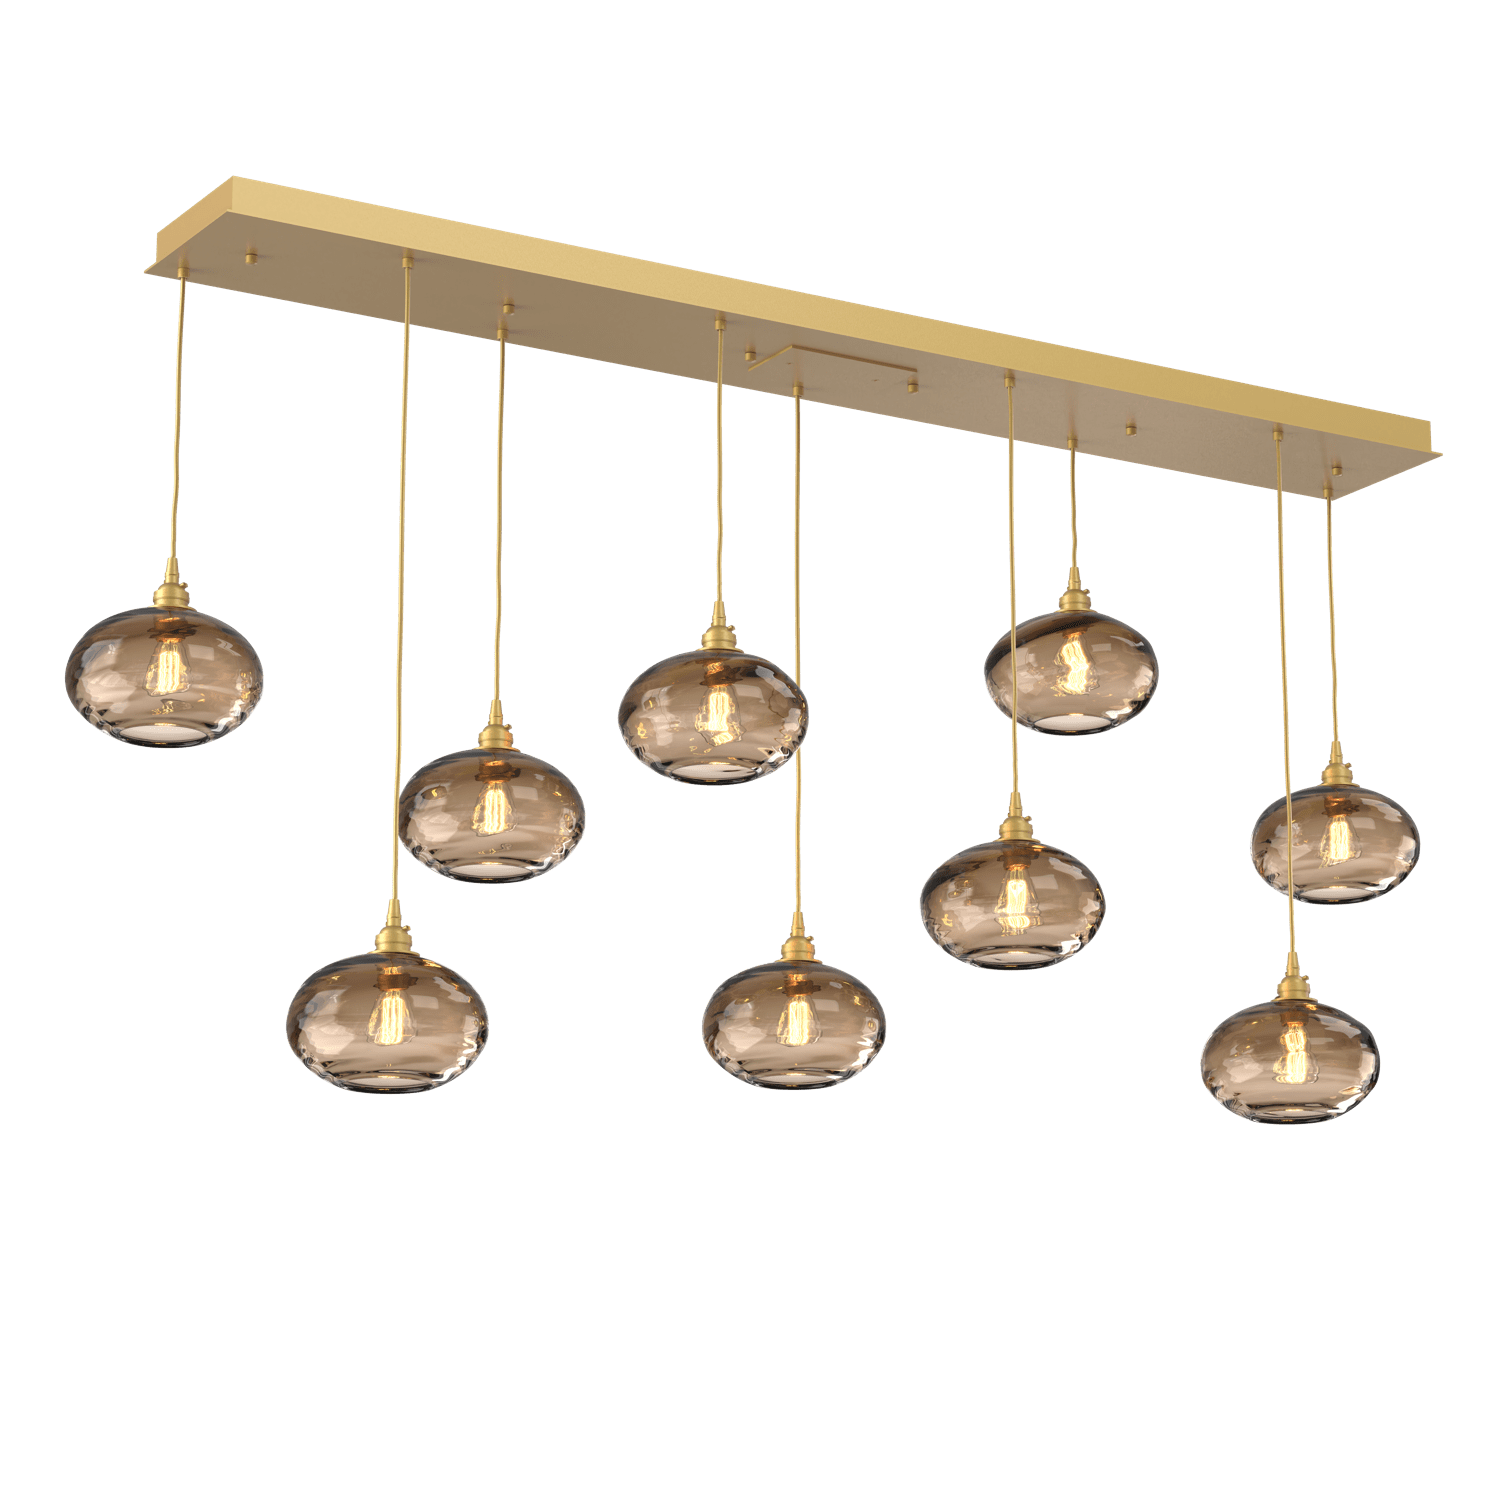 PLB0036-09-GB-OB-Hammerton-Studio-Optic-Blown-Glass-Coppa-9-light-linear-pendant-chandelier-with-gilded-brass-finish-and-optic-bronze-blown-glass-shades-and-incandescent-lamping